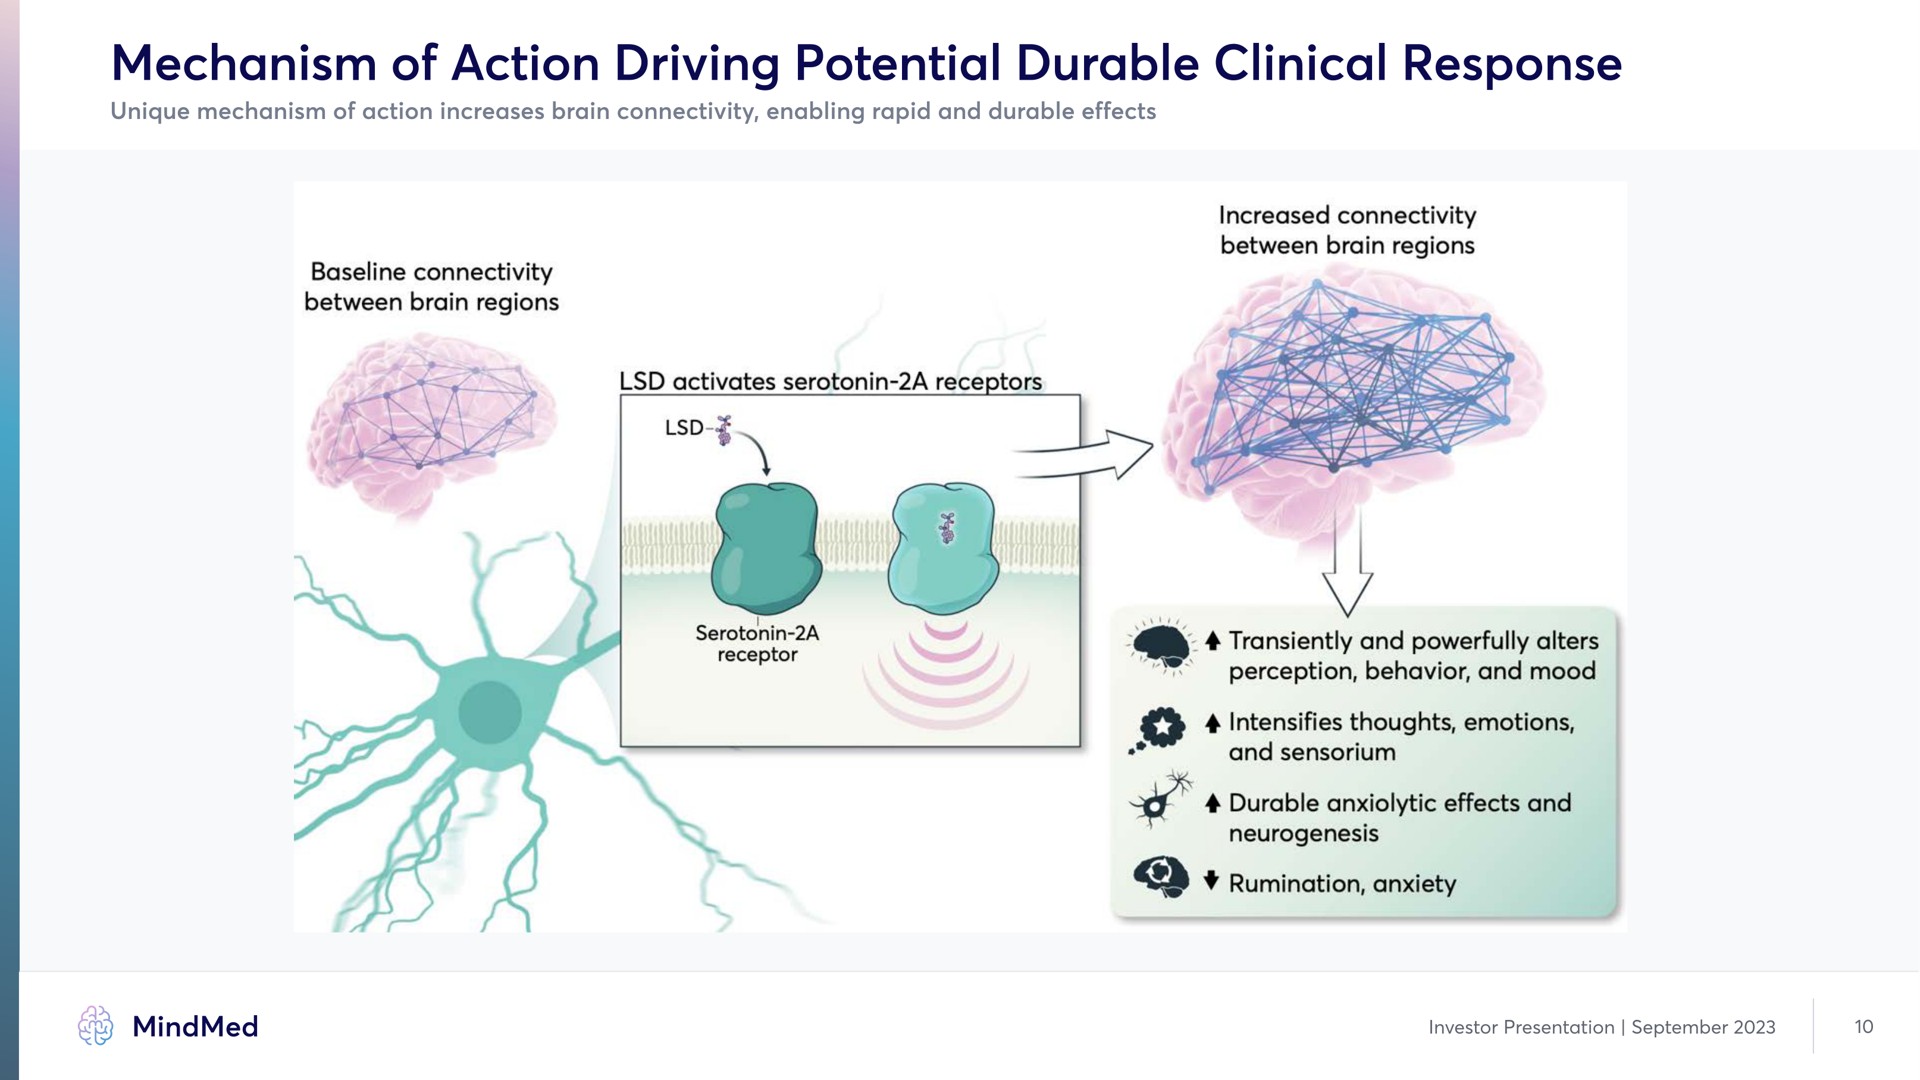 mechanism of action driving potential durable clinical response pas | MindMed